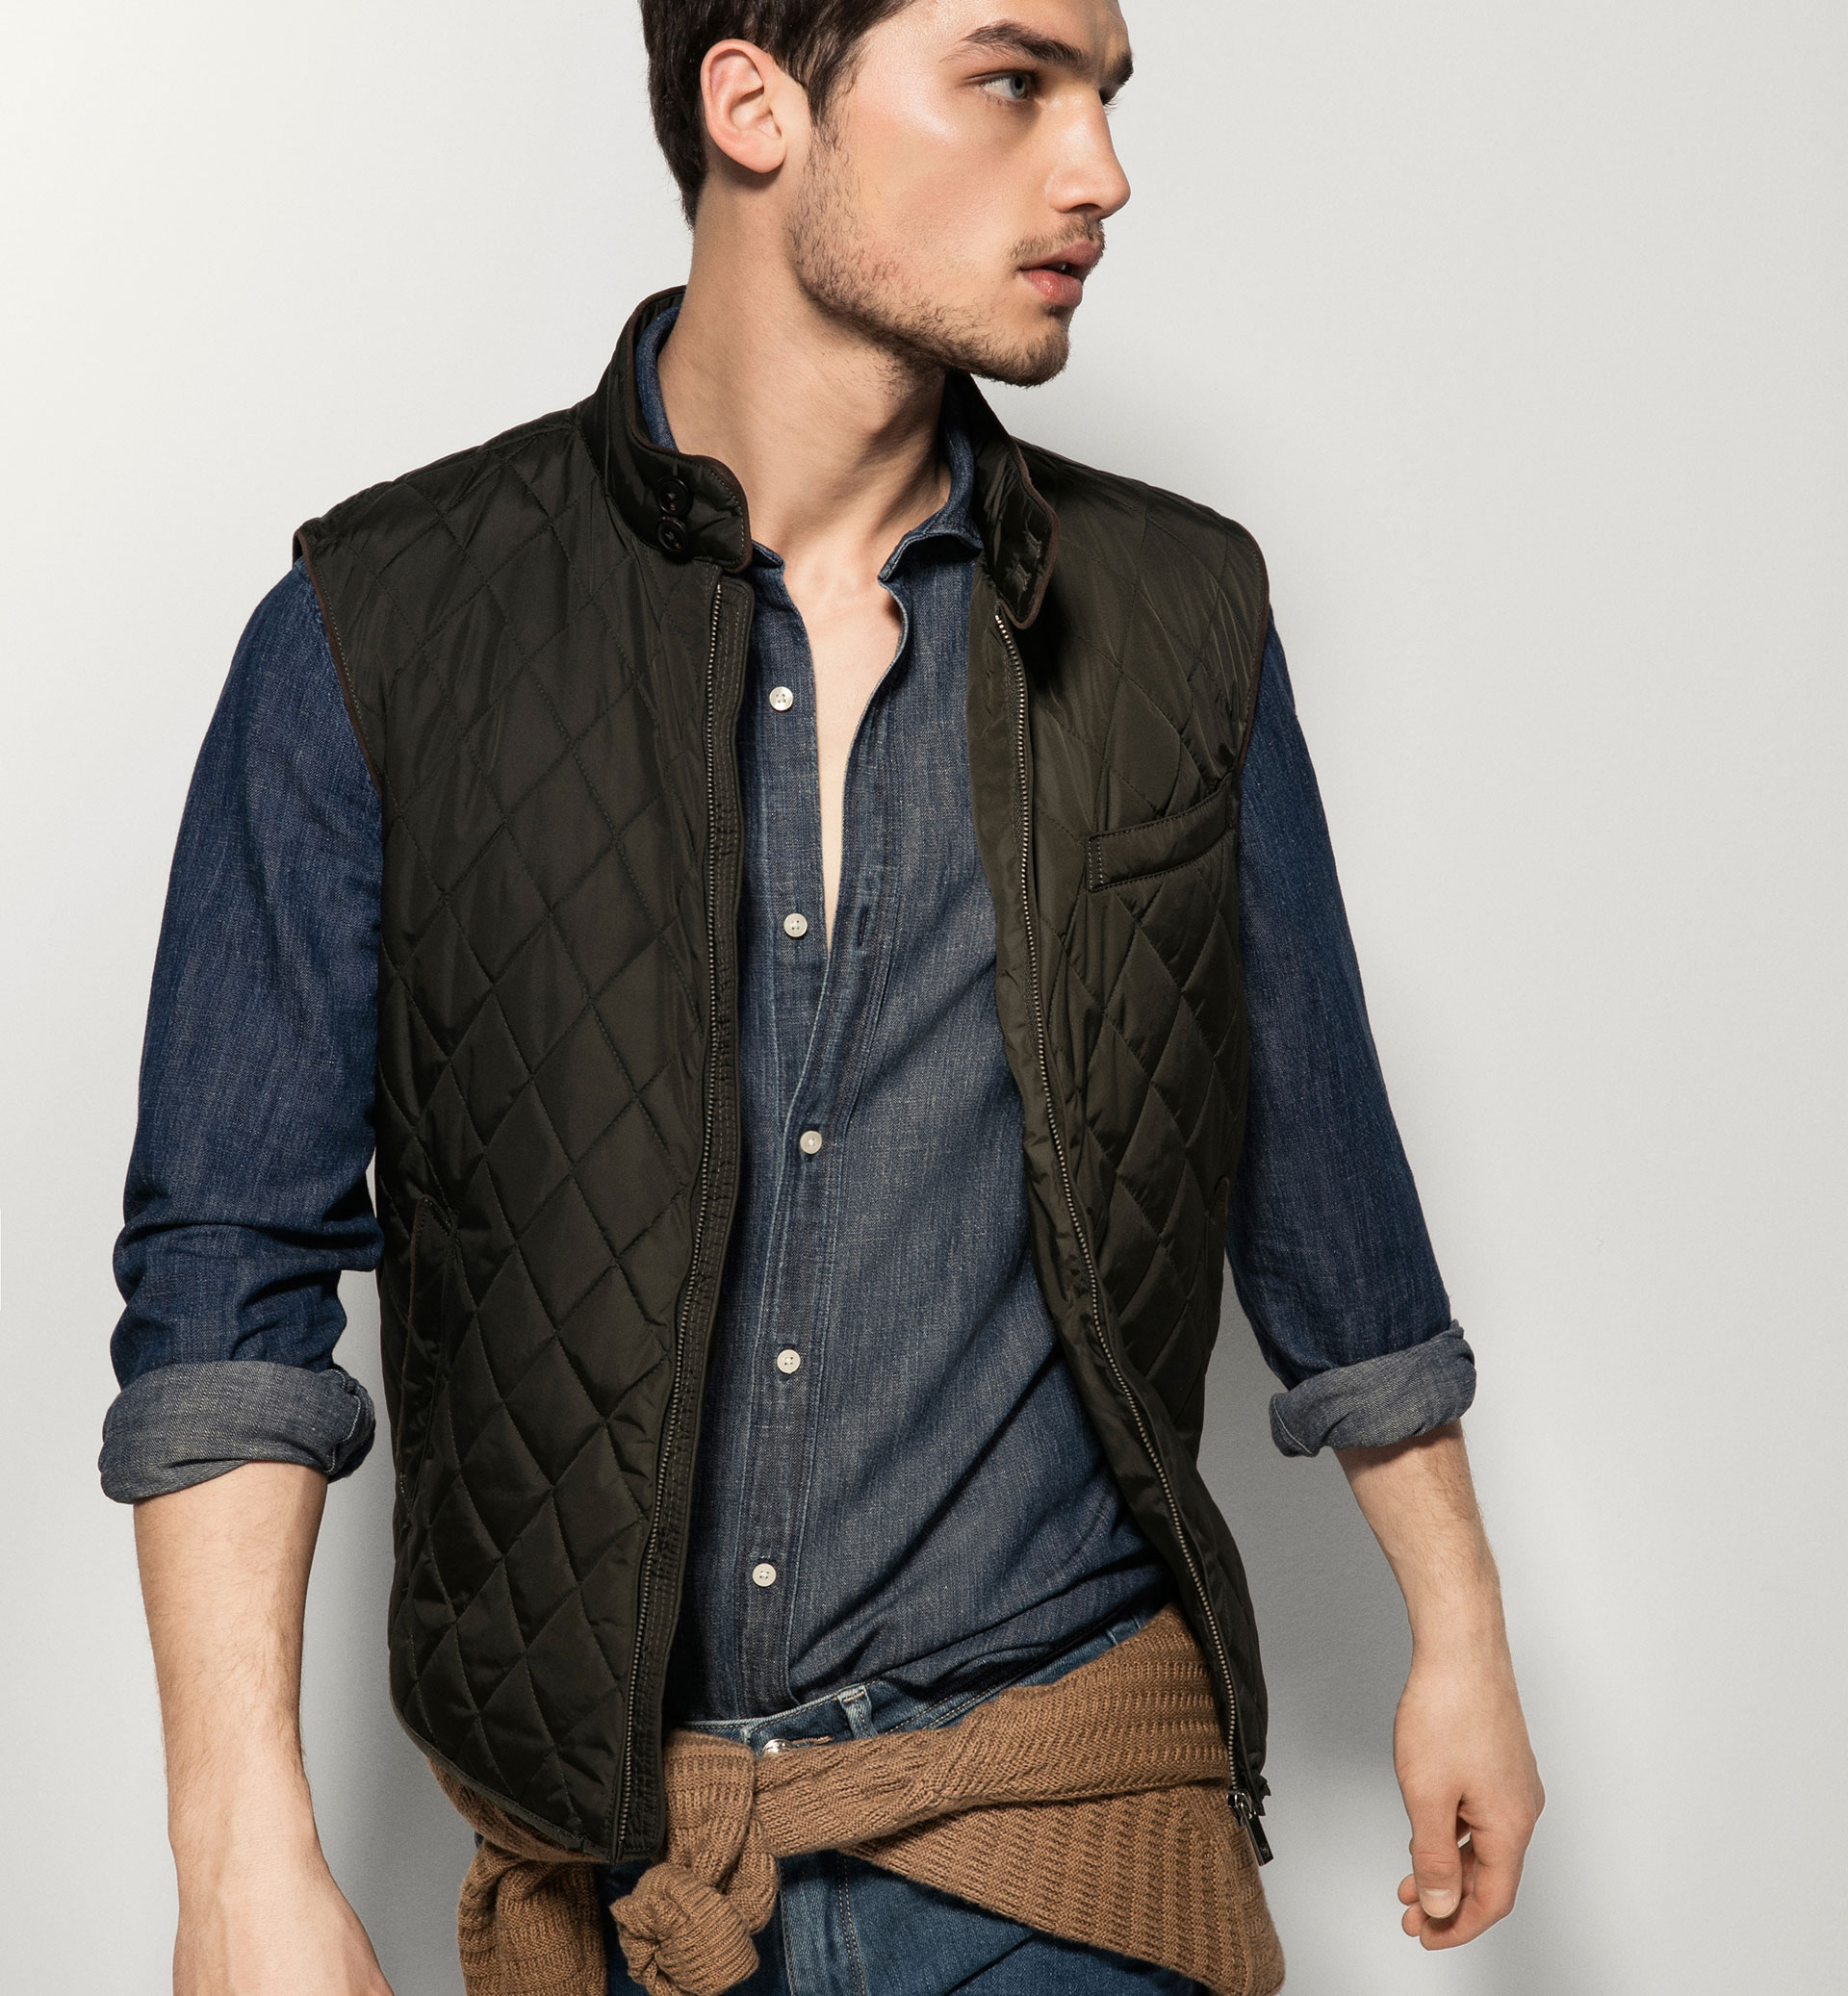 3 Types Of Gilet Jackets You Should Be Knowing